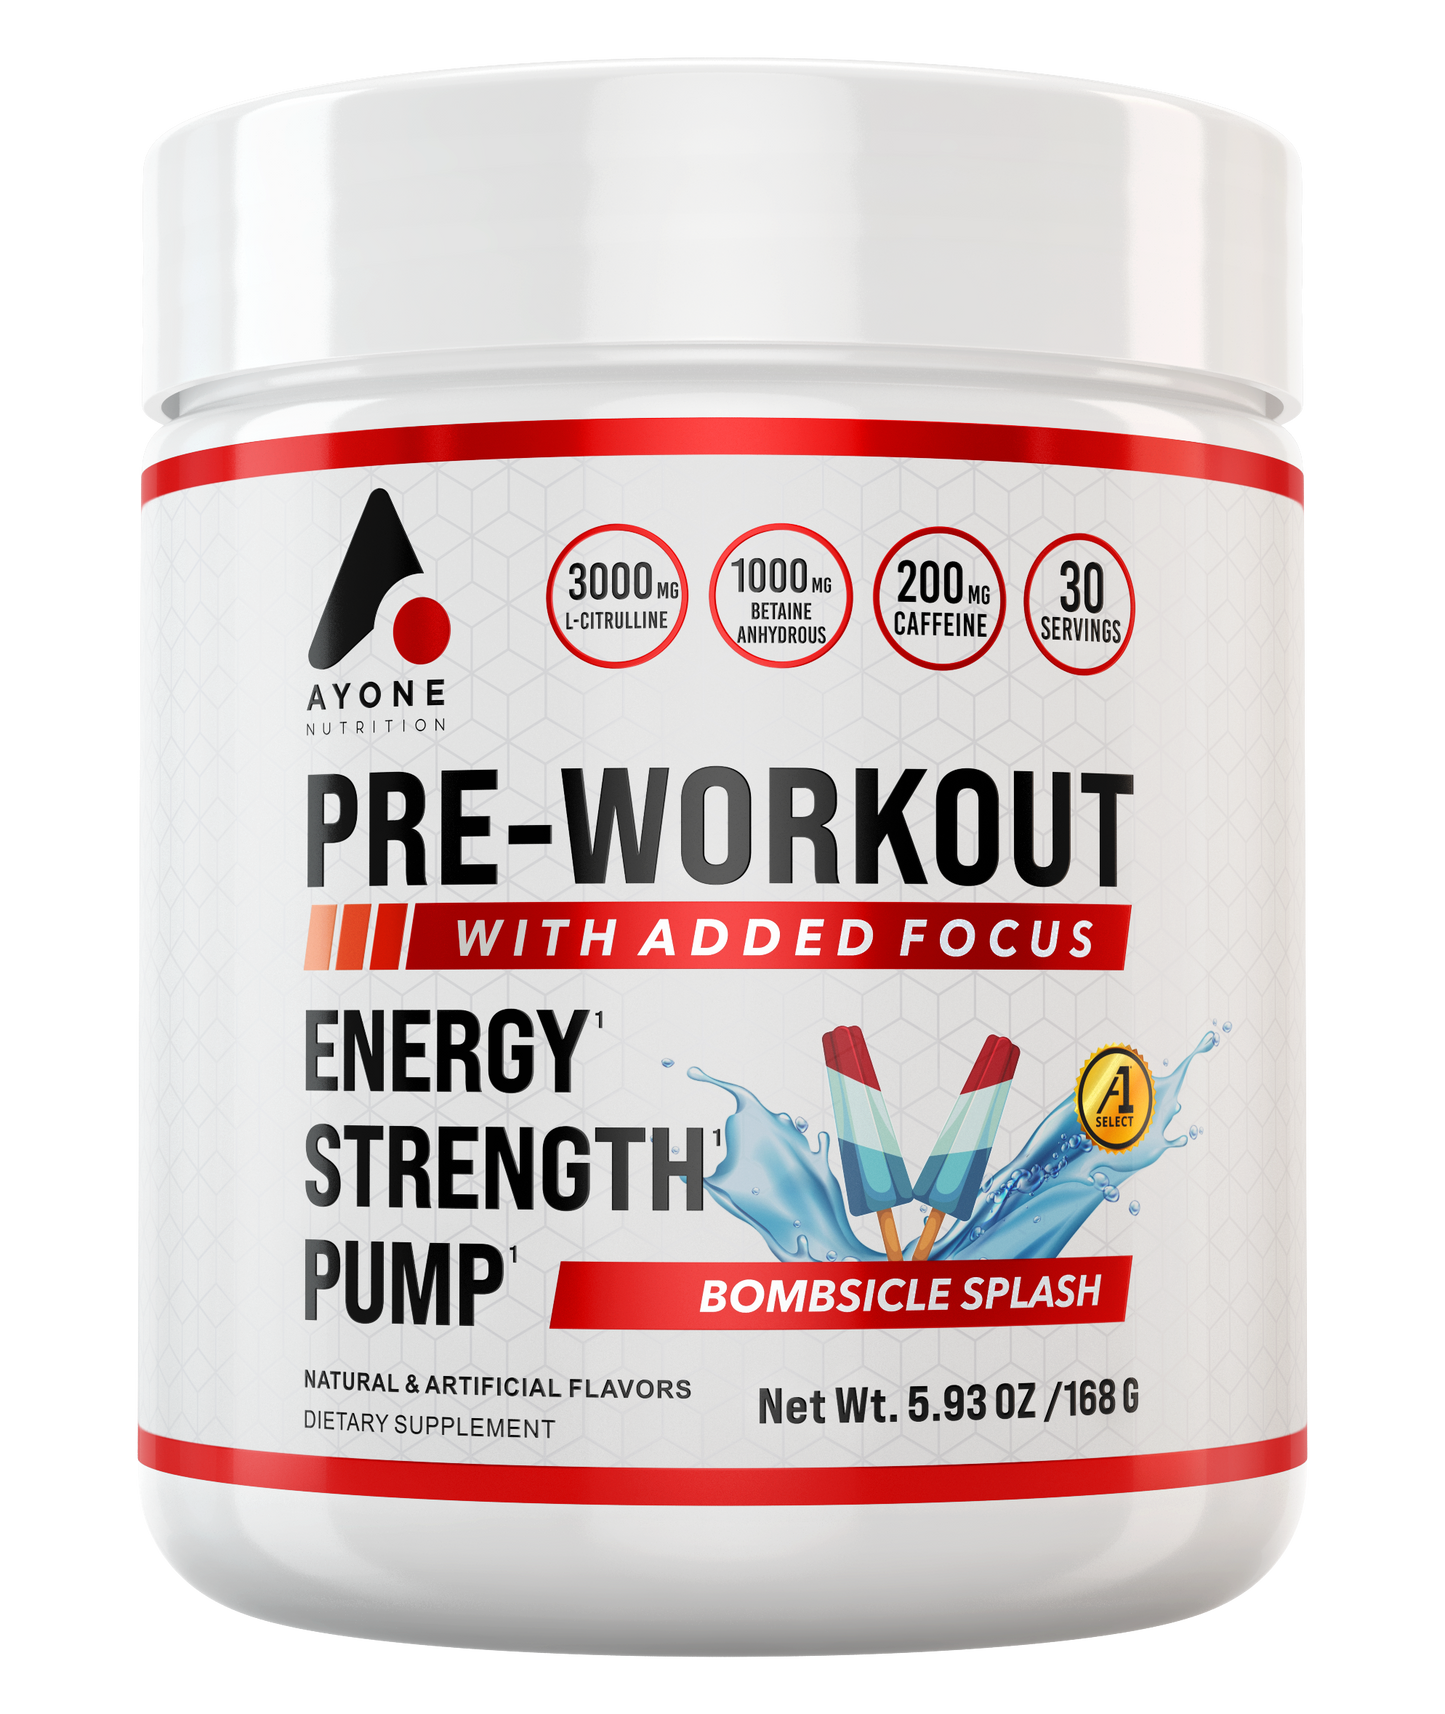 Ayone Nutrition Pre-Workout - Bombsicle Splash